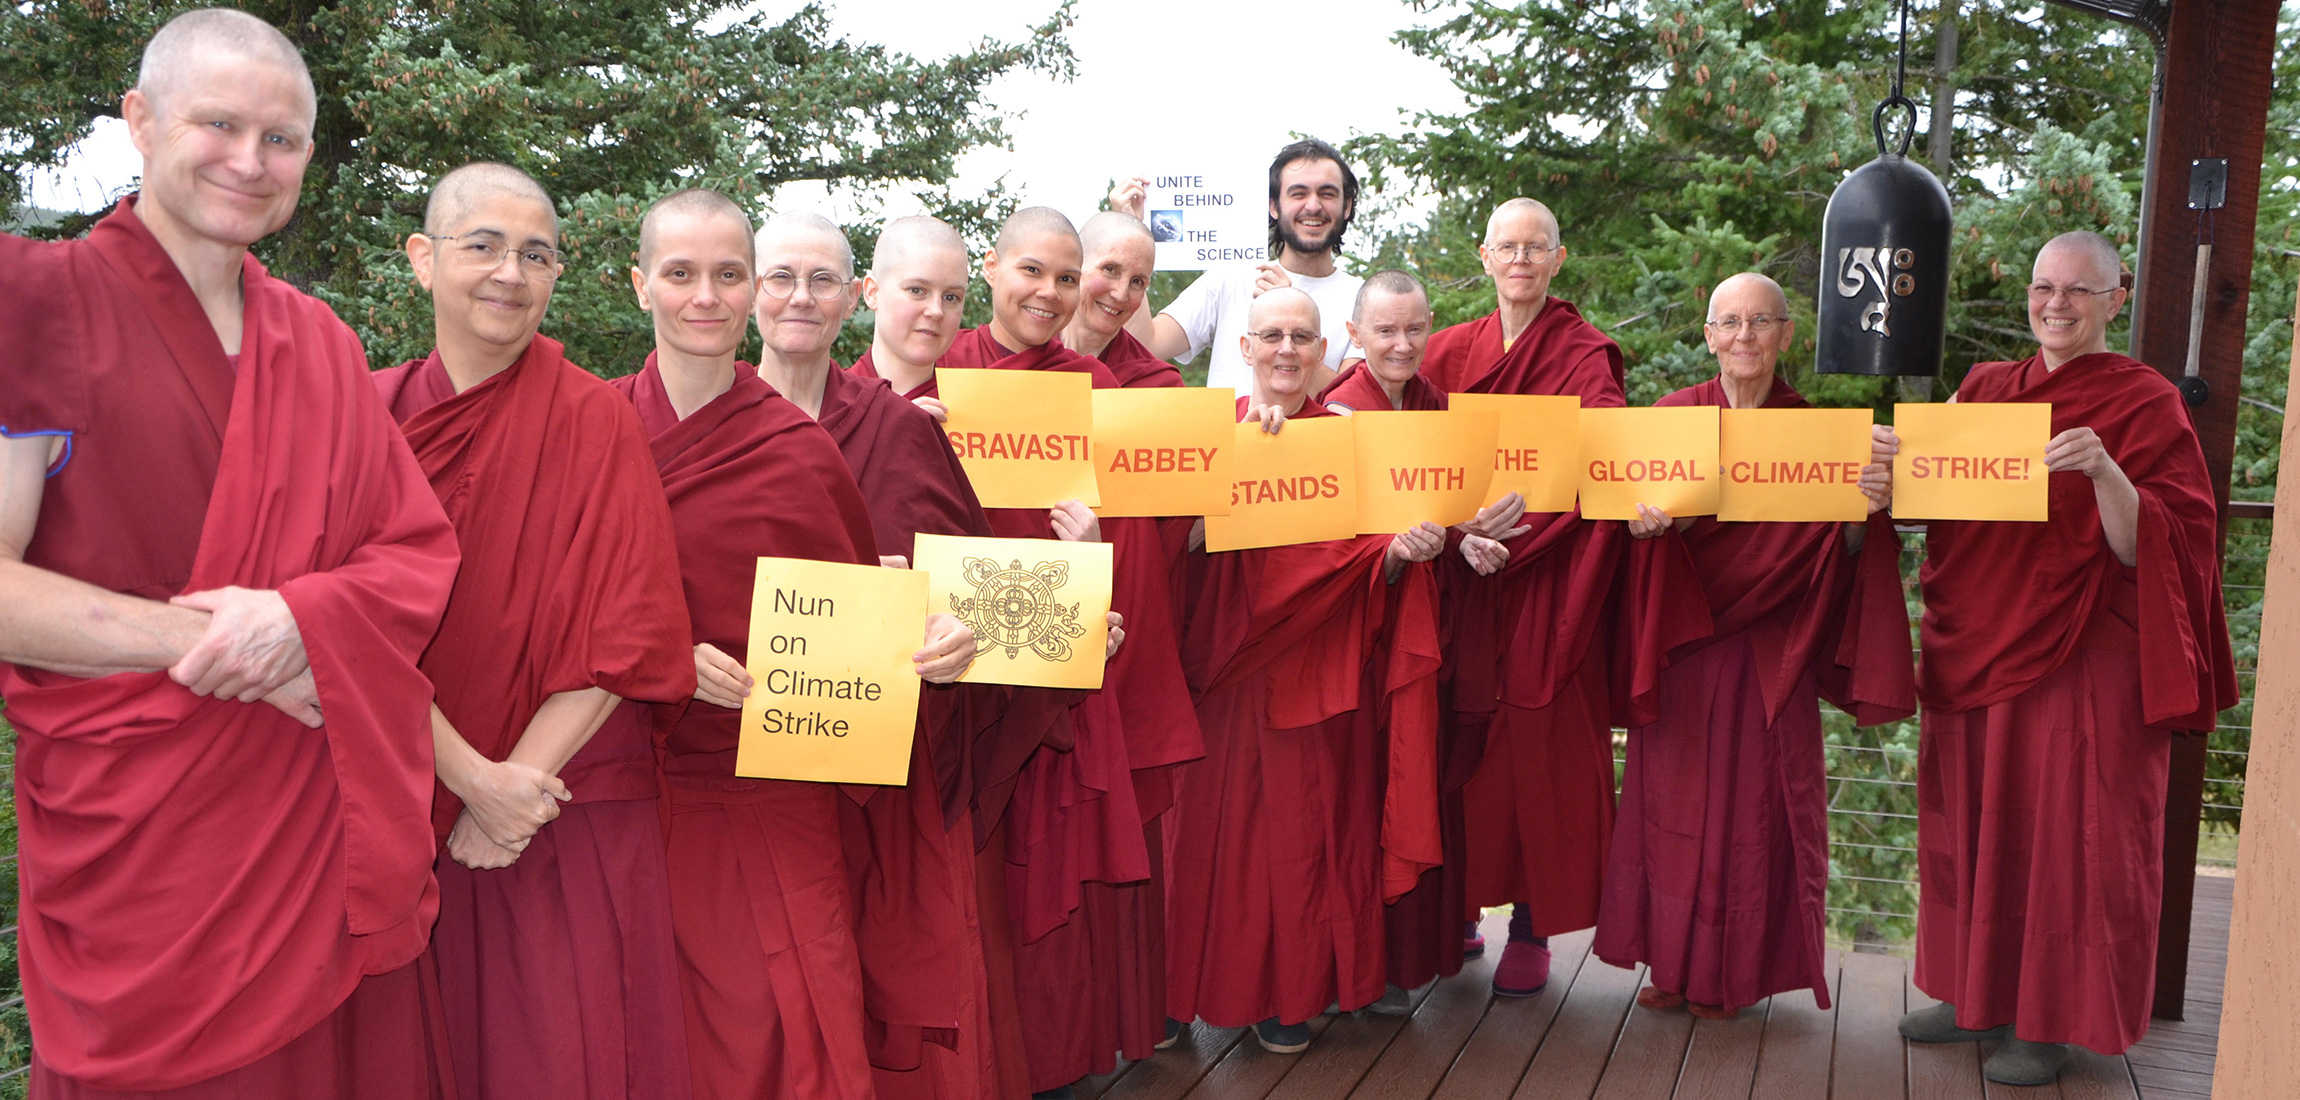 Faced with a difficult second half of 2020, Buddhist practitioners throughout the region got creative. Regional Buddhists turned to the future with creative initiatives to stop climate change, many new ways to offer Dharma online, and new forms of social activism